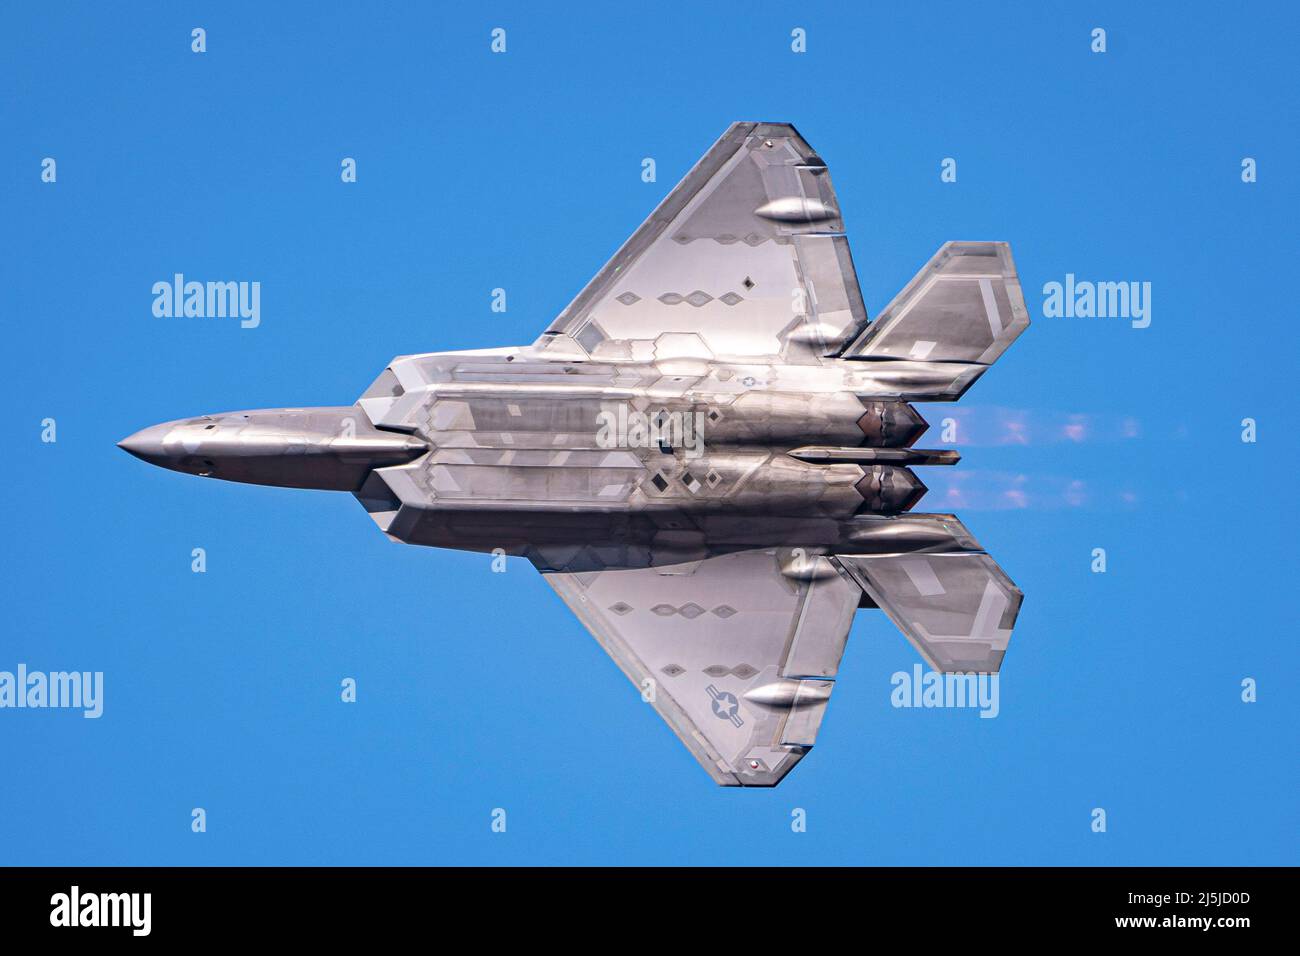 Santiago, Chile. 3rd Apr, 2022. U.S. Air Force Maj. Joshua Caboâ Gunderson, F-22 Raptor Demonstration Team commander and pilot, initiates a minimum radius turn during rehearsal for the 2022 FIDAE Air & Trade Show, April 3, 2022 in Santiago, Chile. The F-22 Raptor's two Pratt and Whitney F119 Turbofan engines bring a combined 70,000 pounds of thrust in combination with two-dimensional thrust vectoring to enable maximum maneuverability for the multi-role air-to-air stealth fighter. Credit: U.S. Air Force/ZUMA Press Wire Service/ZUMAPRESS.com/Alamy Live News Stock Photo